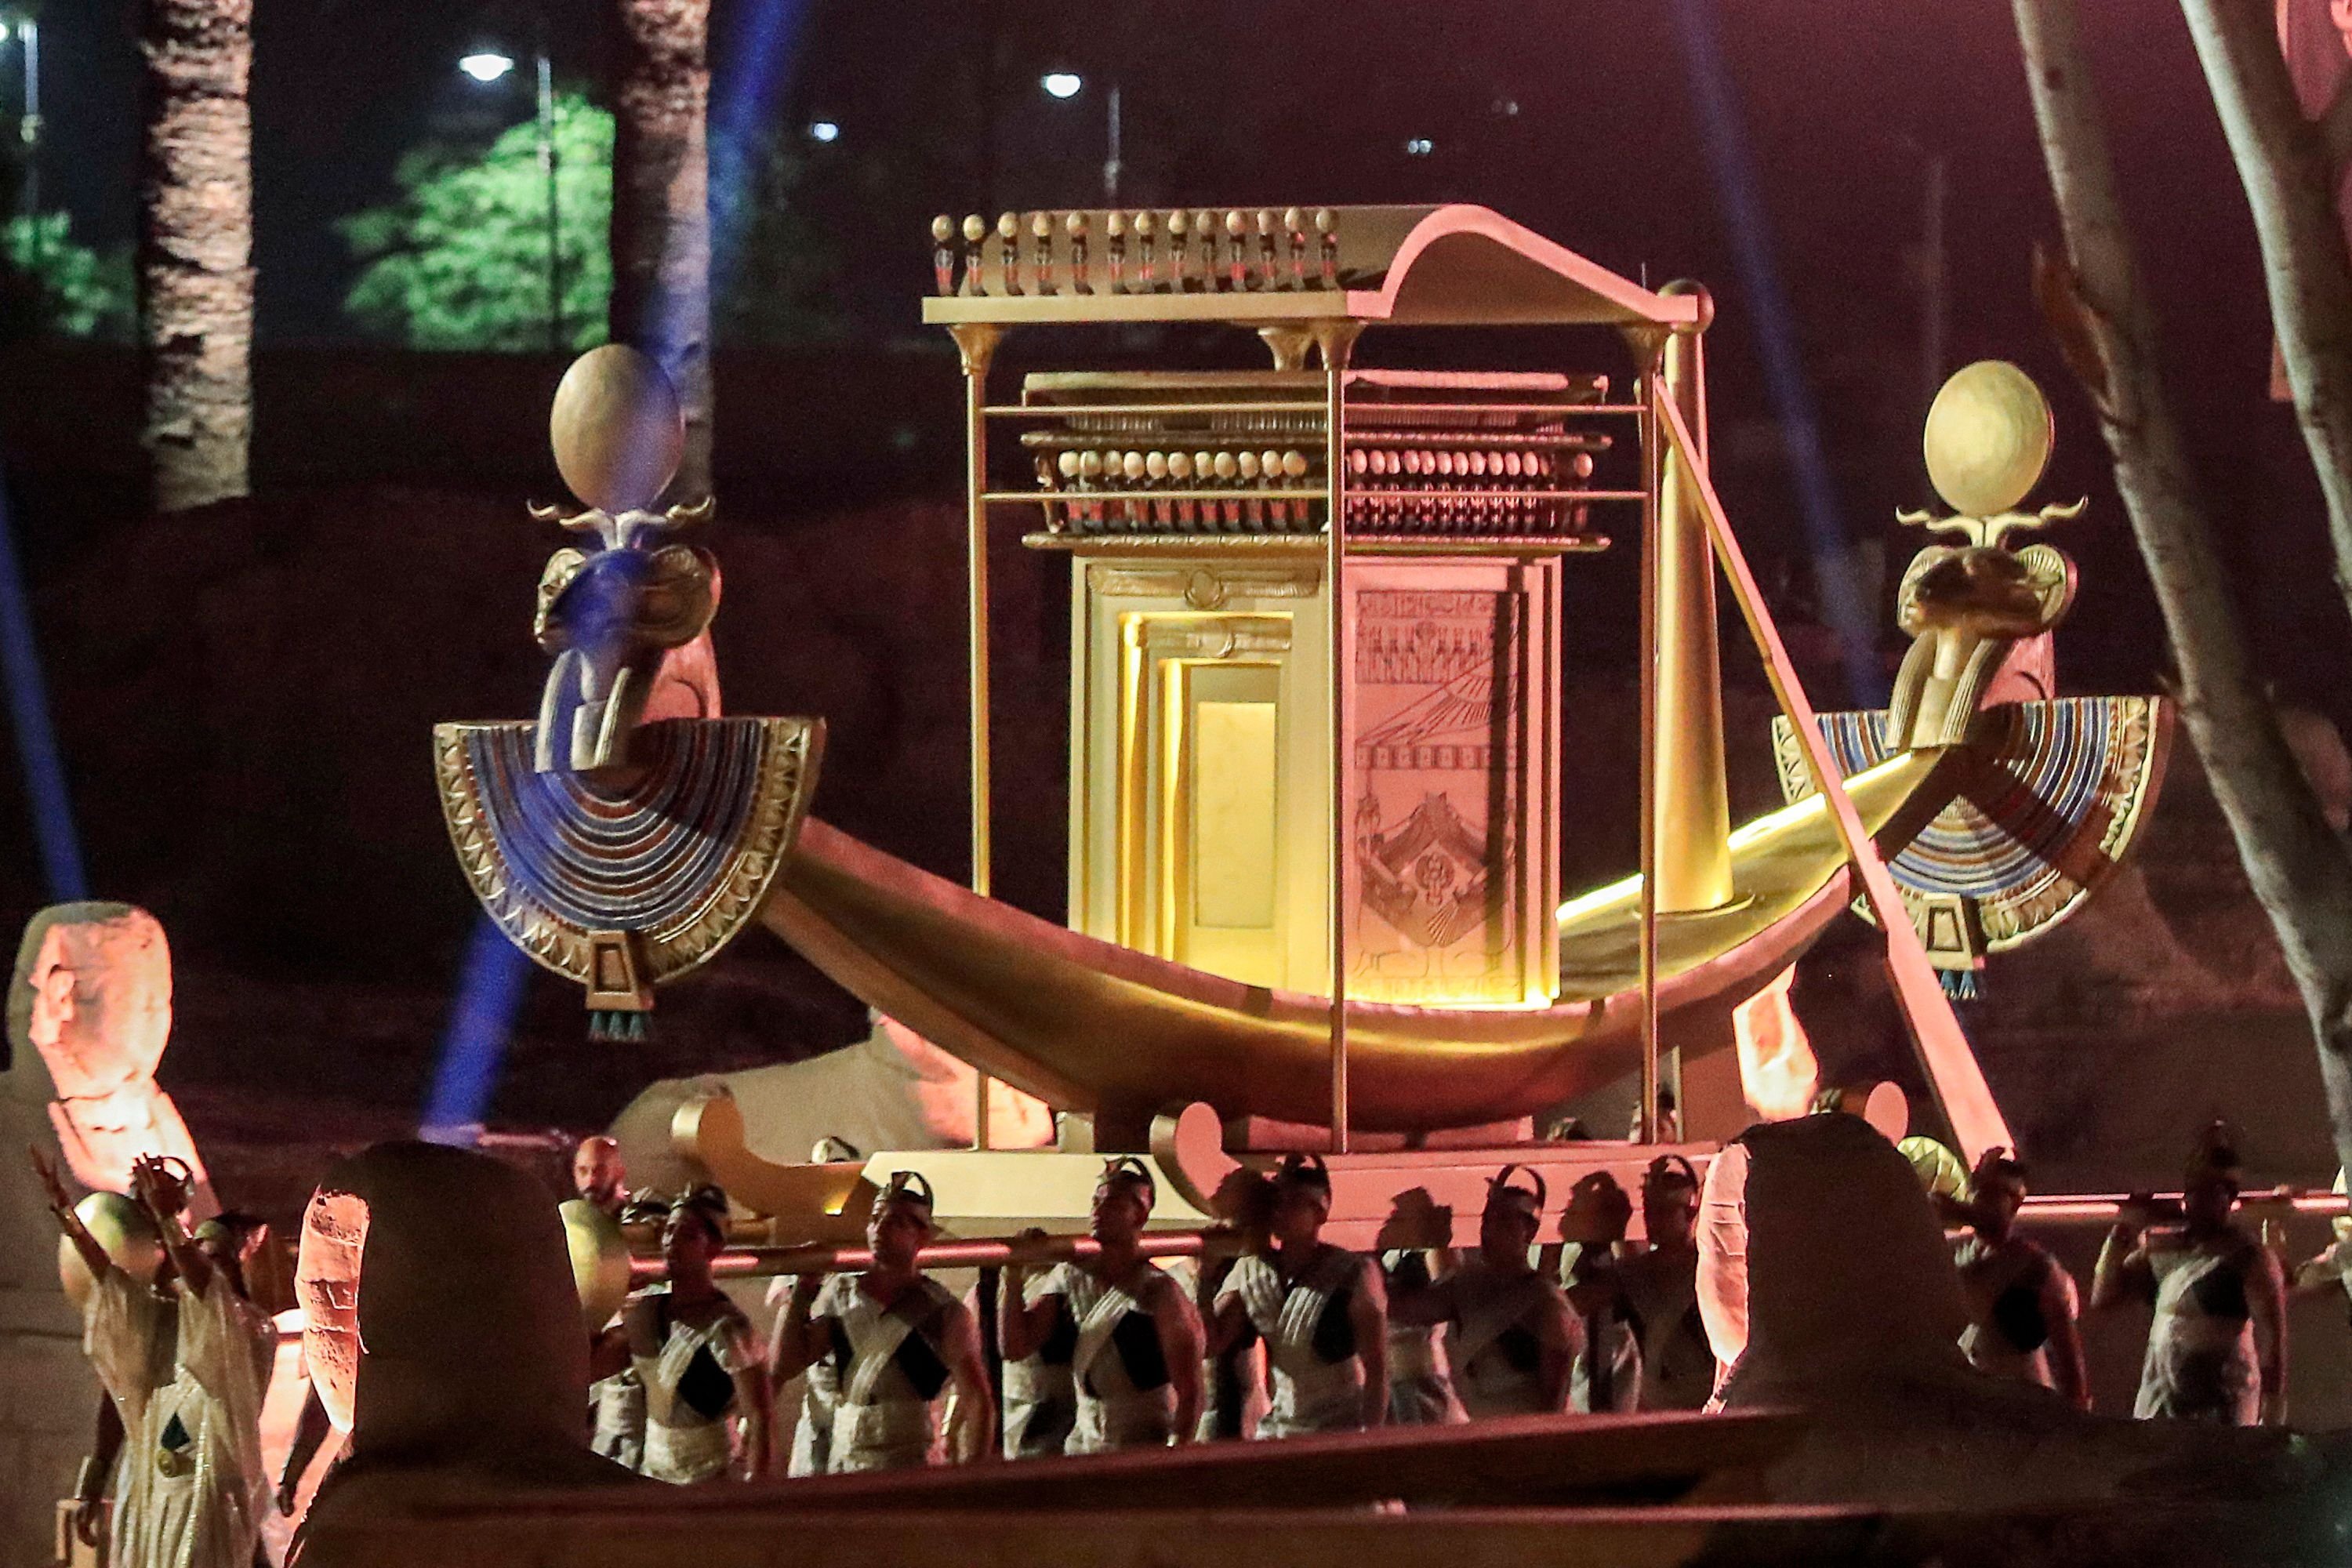 Performers carry a palanquin during the official ceremony opening the "Rams Road" near the Temple of Luxor (built around 1400 B.C.) in Egypt's southern city of the same name on Nov. 25, 2021. (AFP Photo)